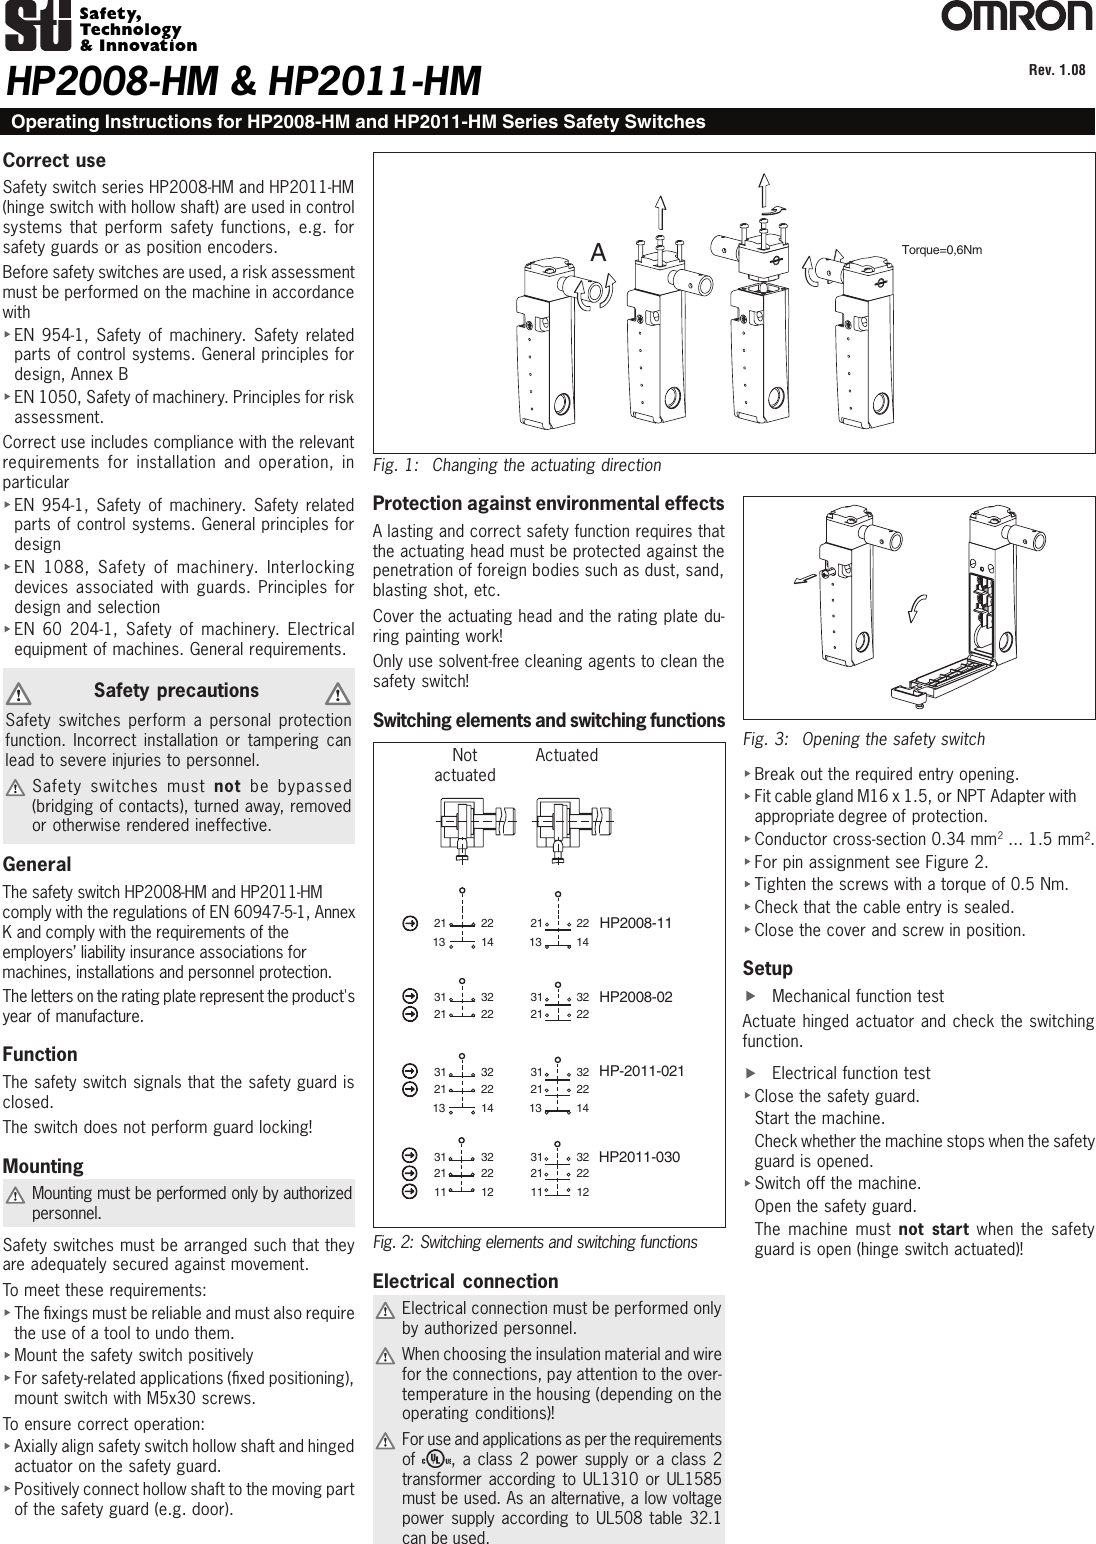 Page 1 of 3 - HP2011- HM Hinge-Operated Safety Interlock Switch Instruction Sheet Manual  HP2011-HM En 201507 C369I-E-01